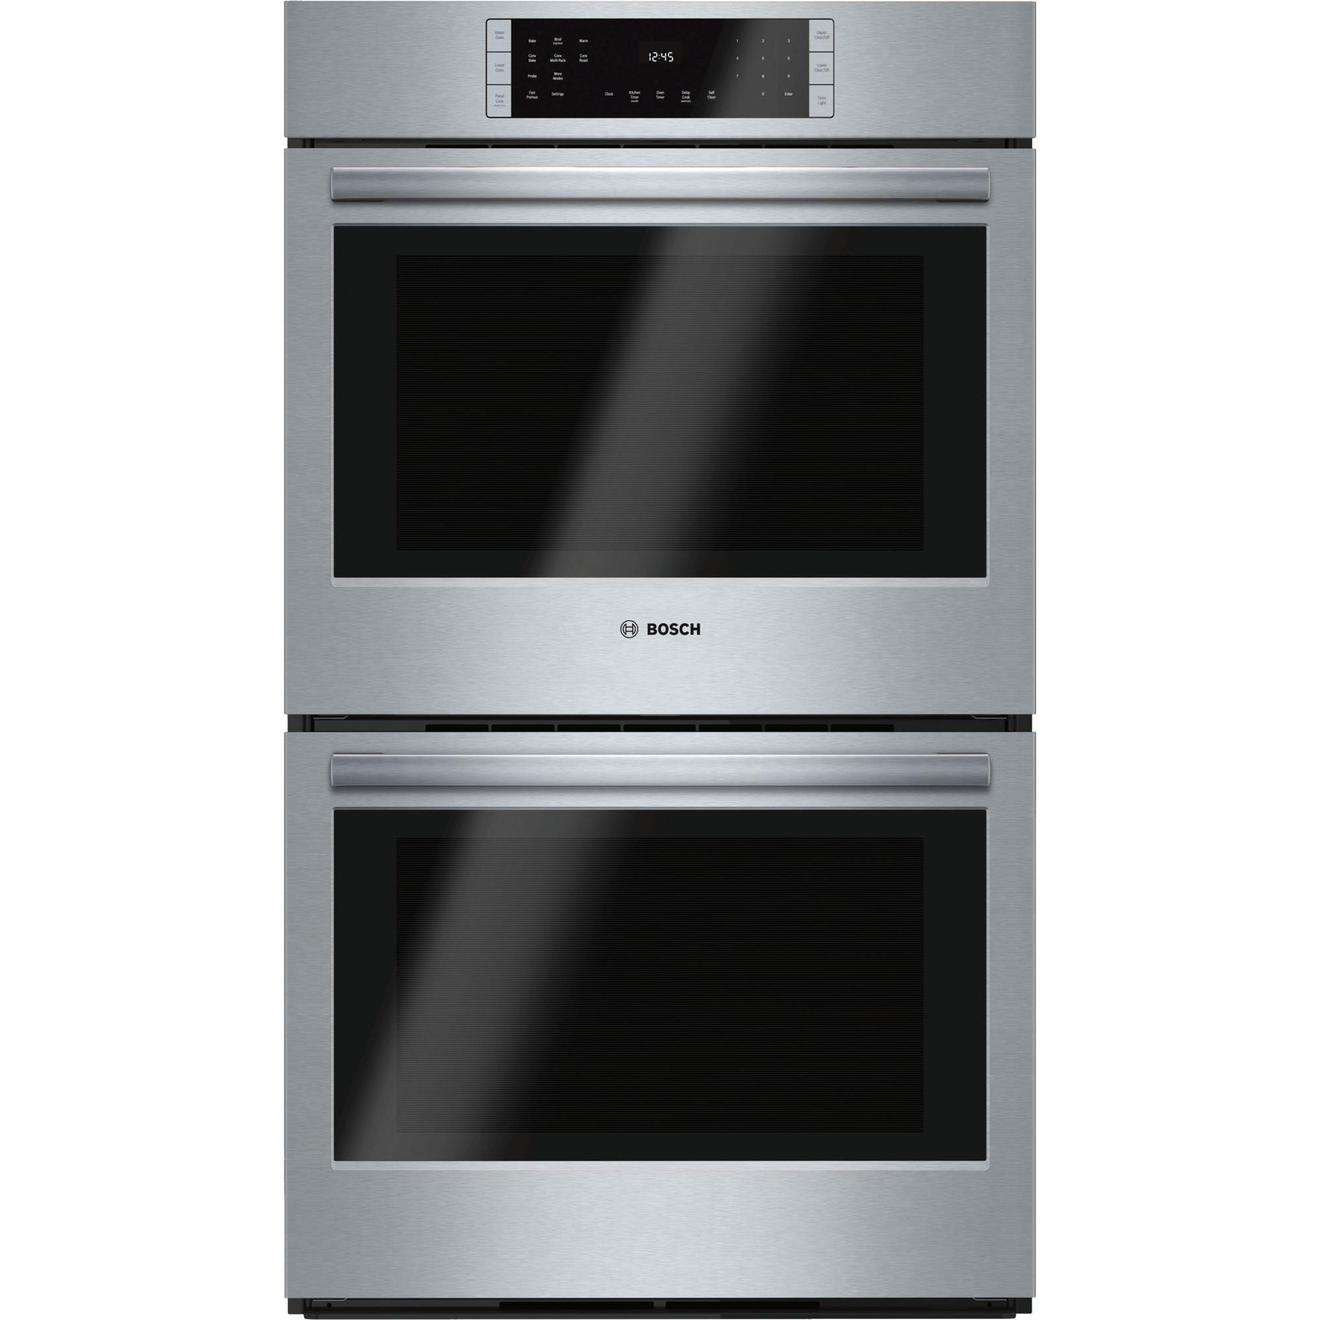 Bosch 30 inch Double Wall Oven with Convection offers at $5749.98 in Trail Appliances